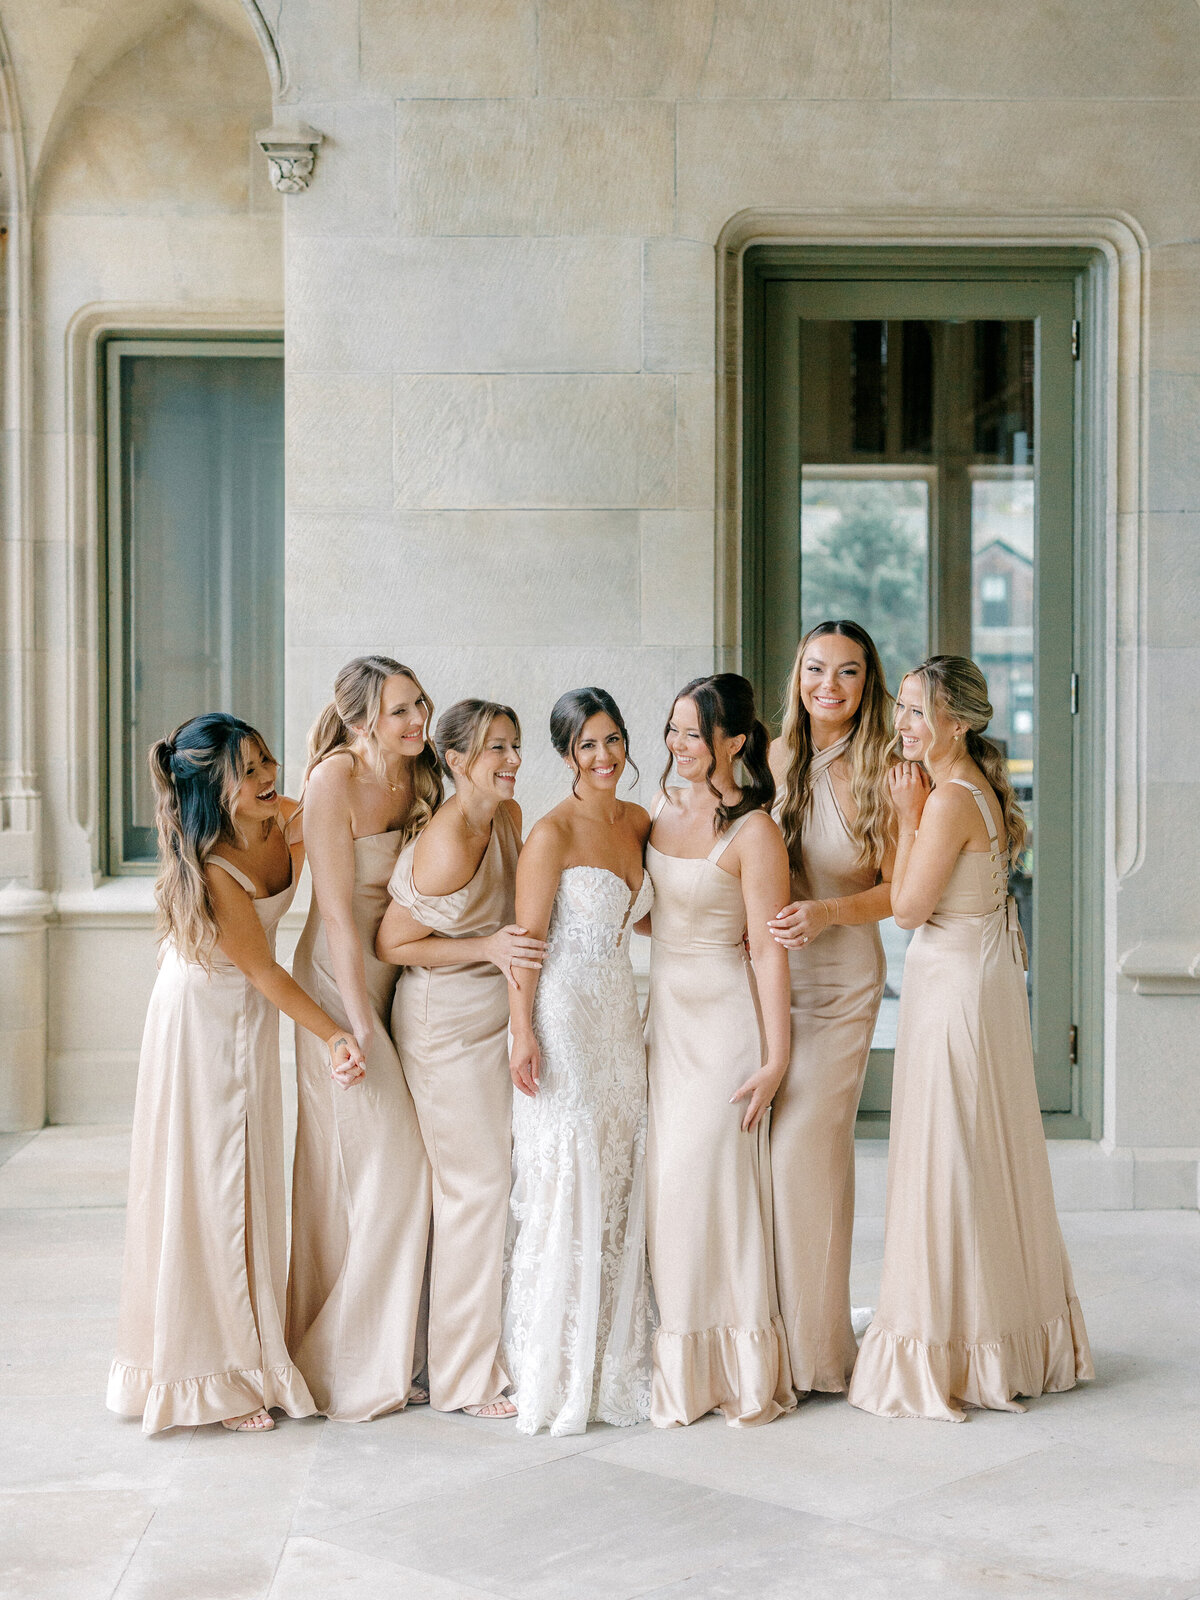 Bride with her bridesmaids in champagne colored dresses all smiling at each other in front of a stone wall